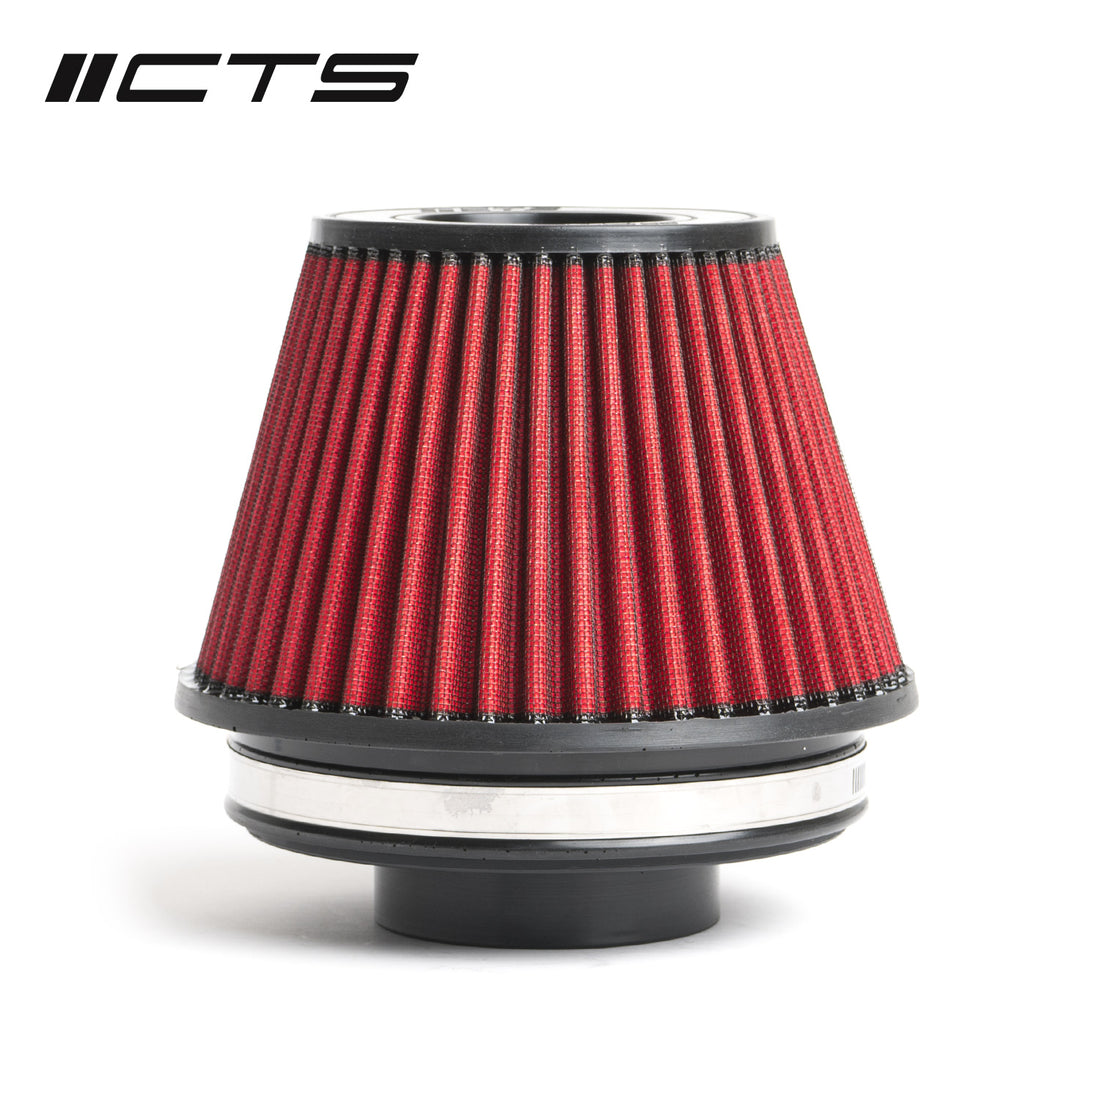 CTS Turbo Air Filter 3.5" for CTS-IT-300R CTS Turbo AF-250